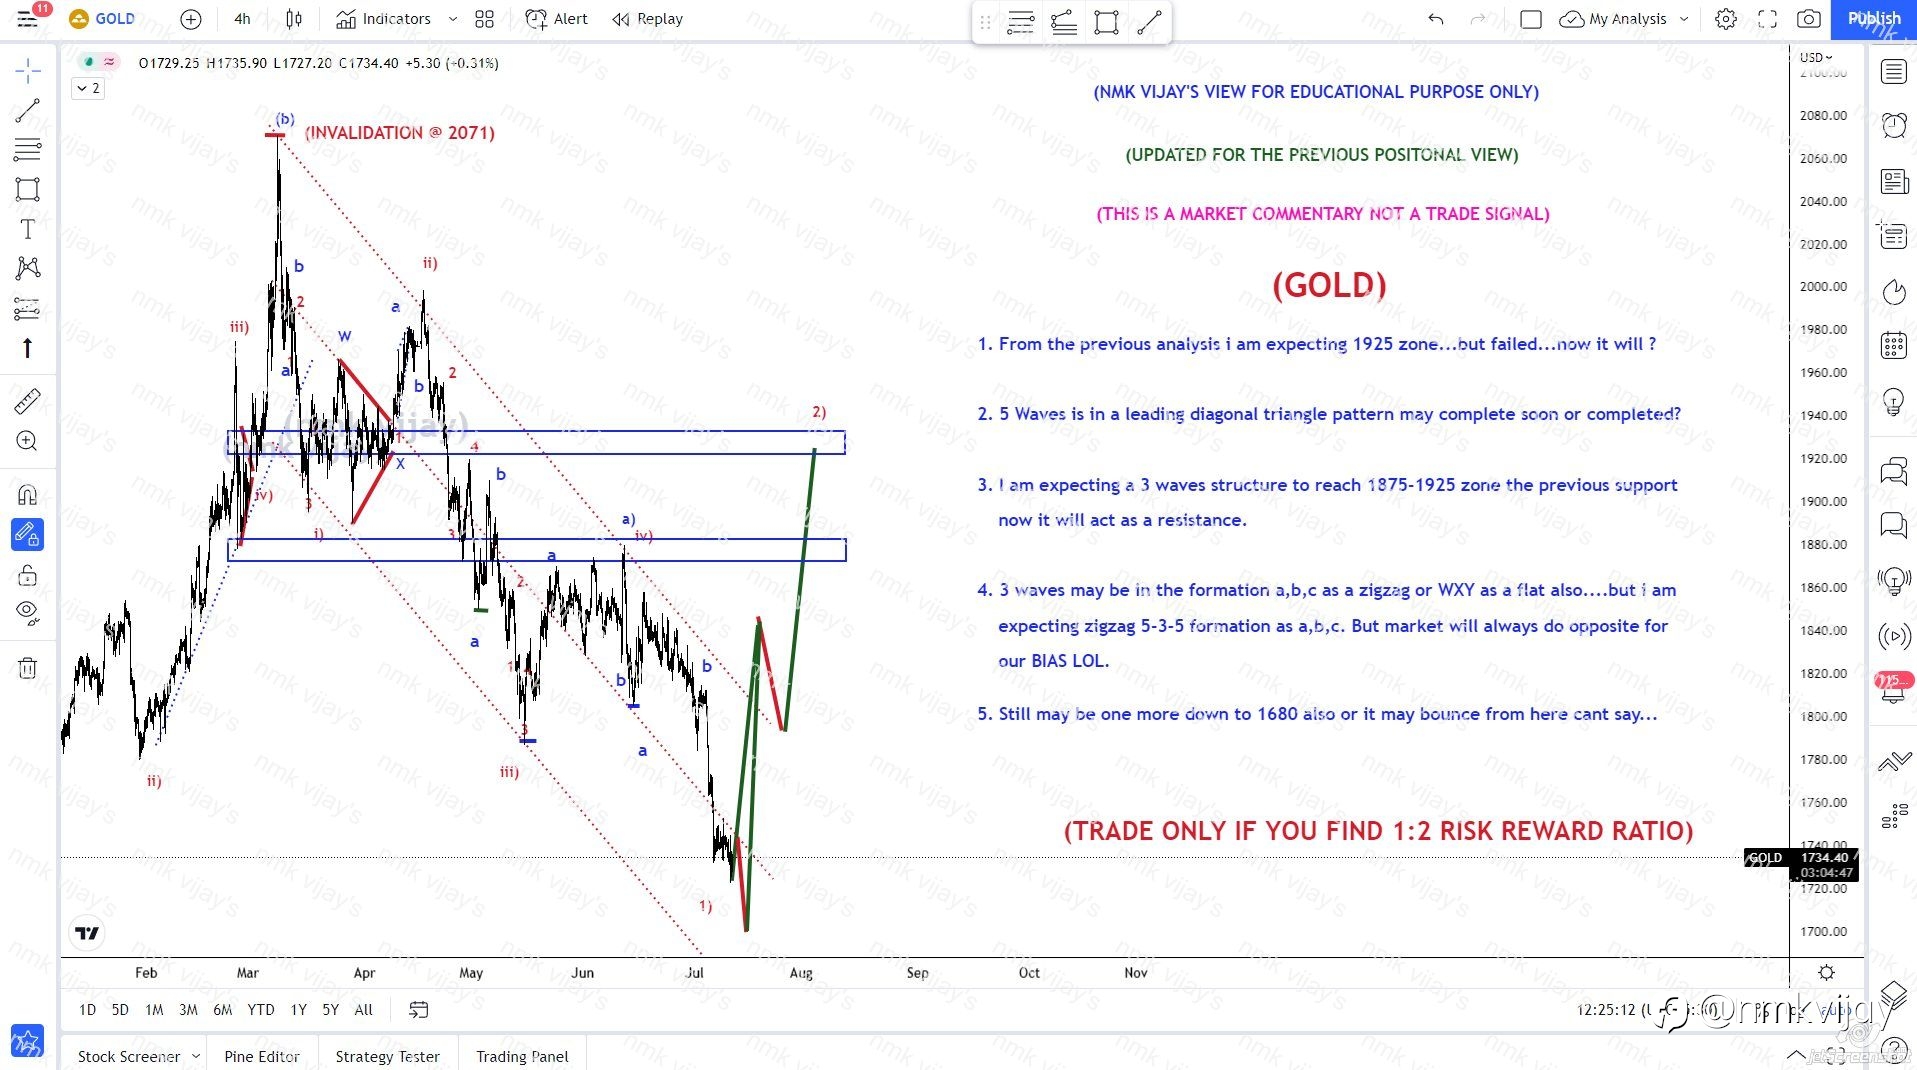 GOLD-Looking for 1875-1925 for wave 2)